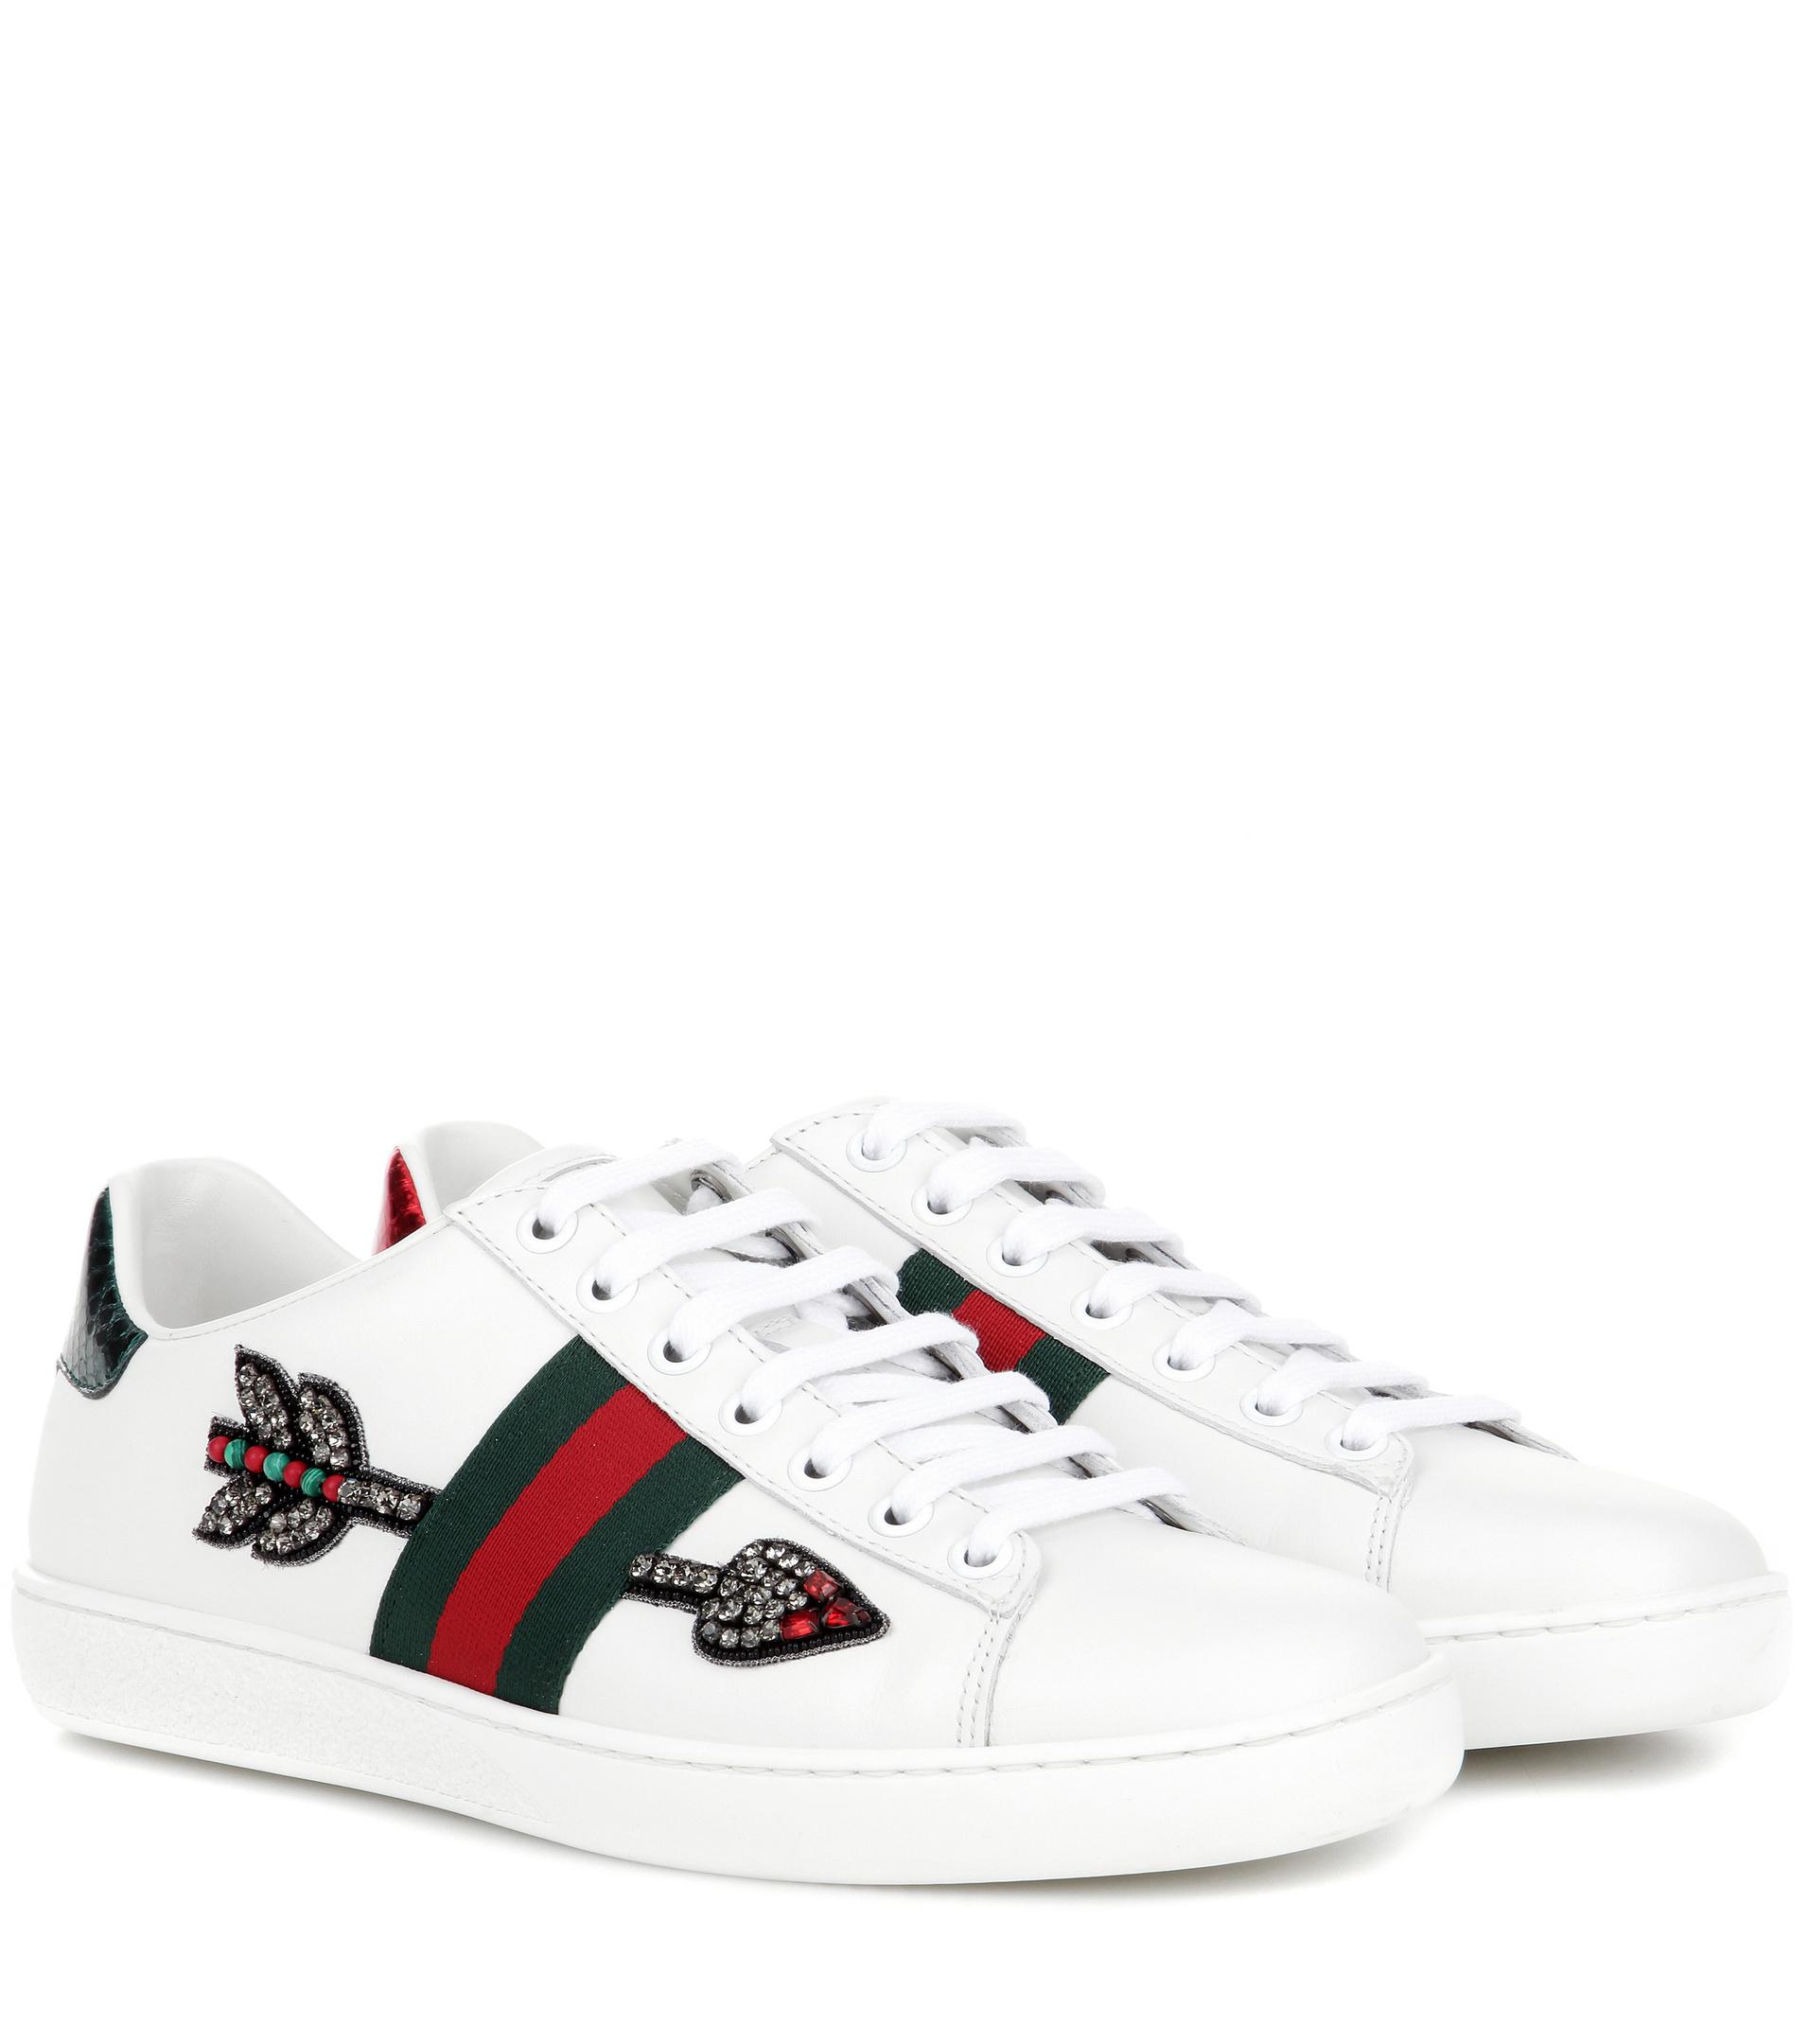 Lyst - Gucci Embellished Leather Sneakers in White